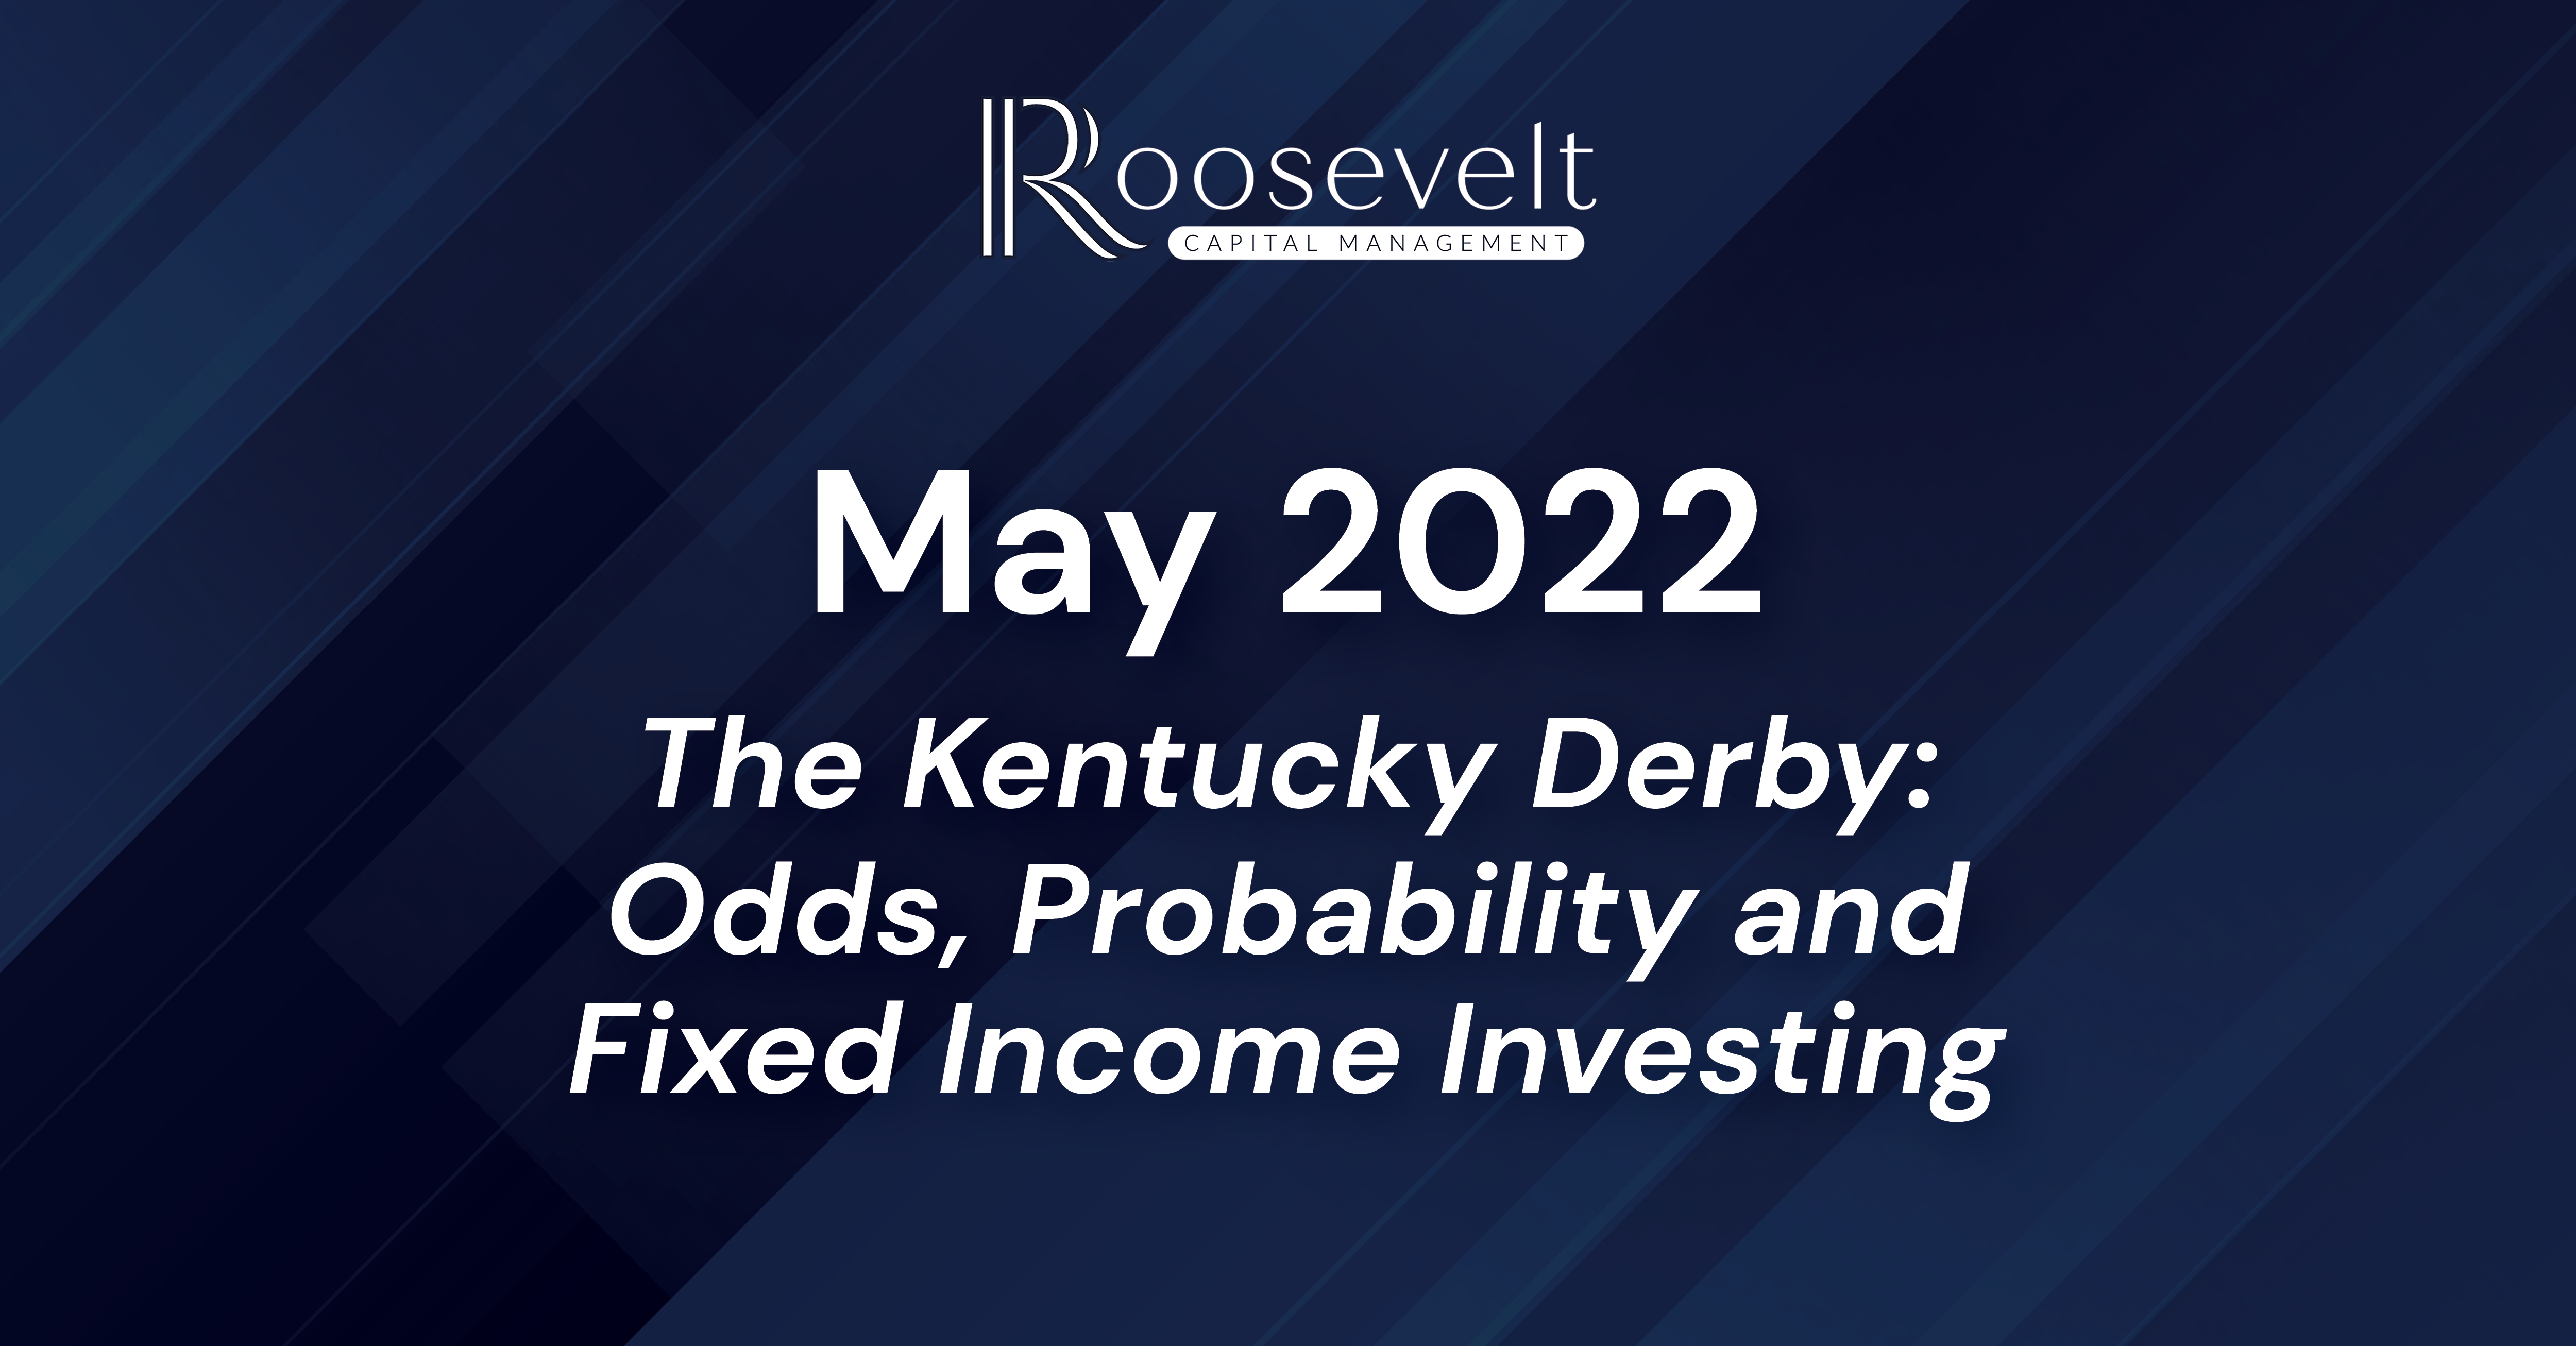 May 2022 - The Kentucky Derby: Odds, Probability and Fixed Income Investing